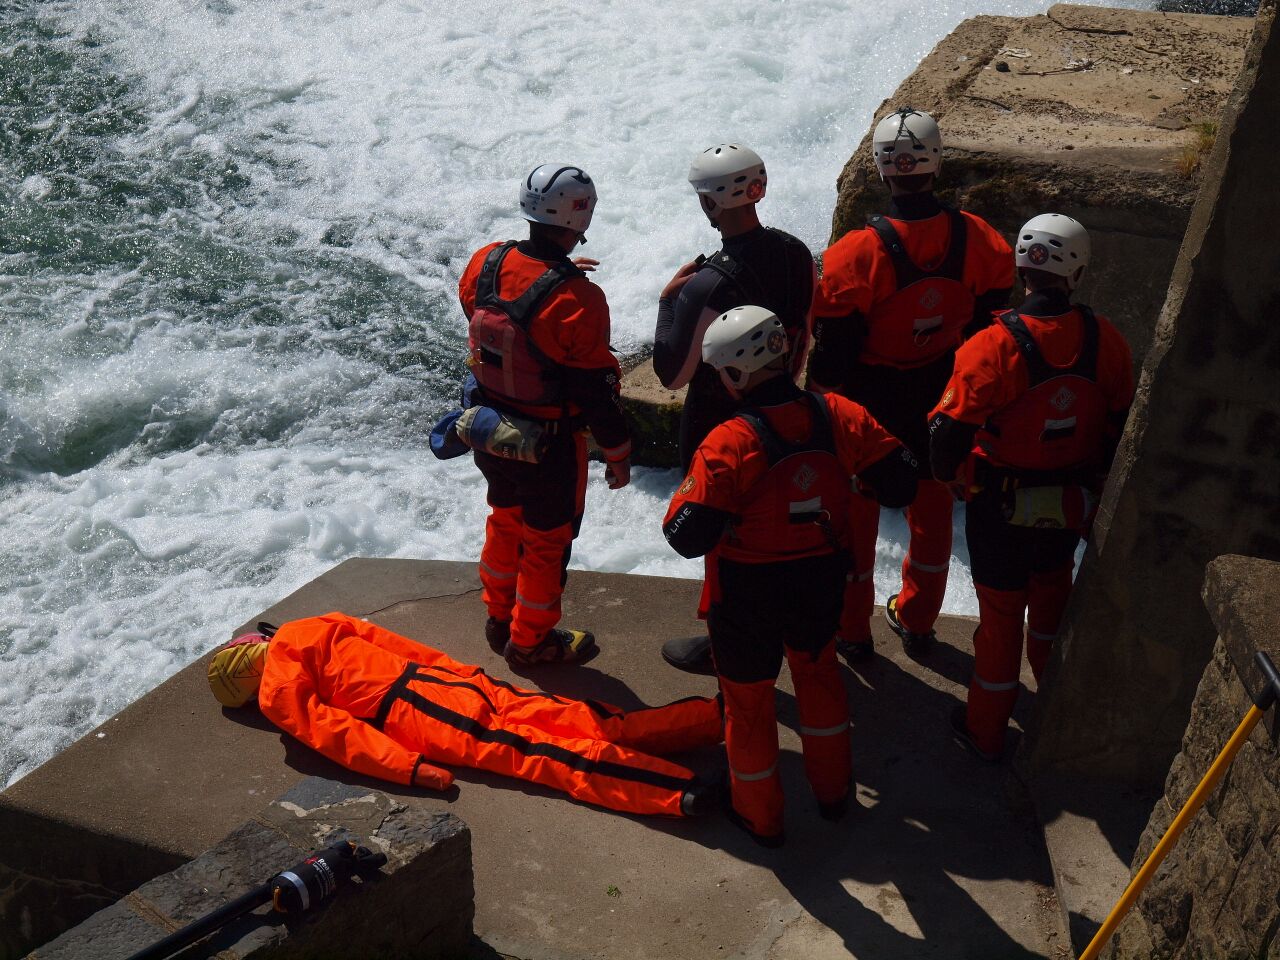 A multi agency exercise in Croatia involving: The Croatian Mountain Rescue Service, The Croatian Military, Police, Fire Service, The Croatioan Agency for Protection & Rescue and representatives of the Agency for Water Management.